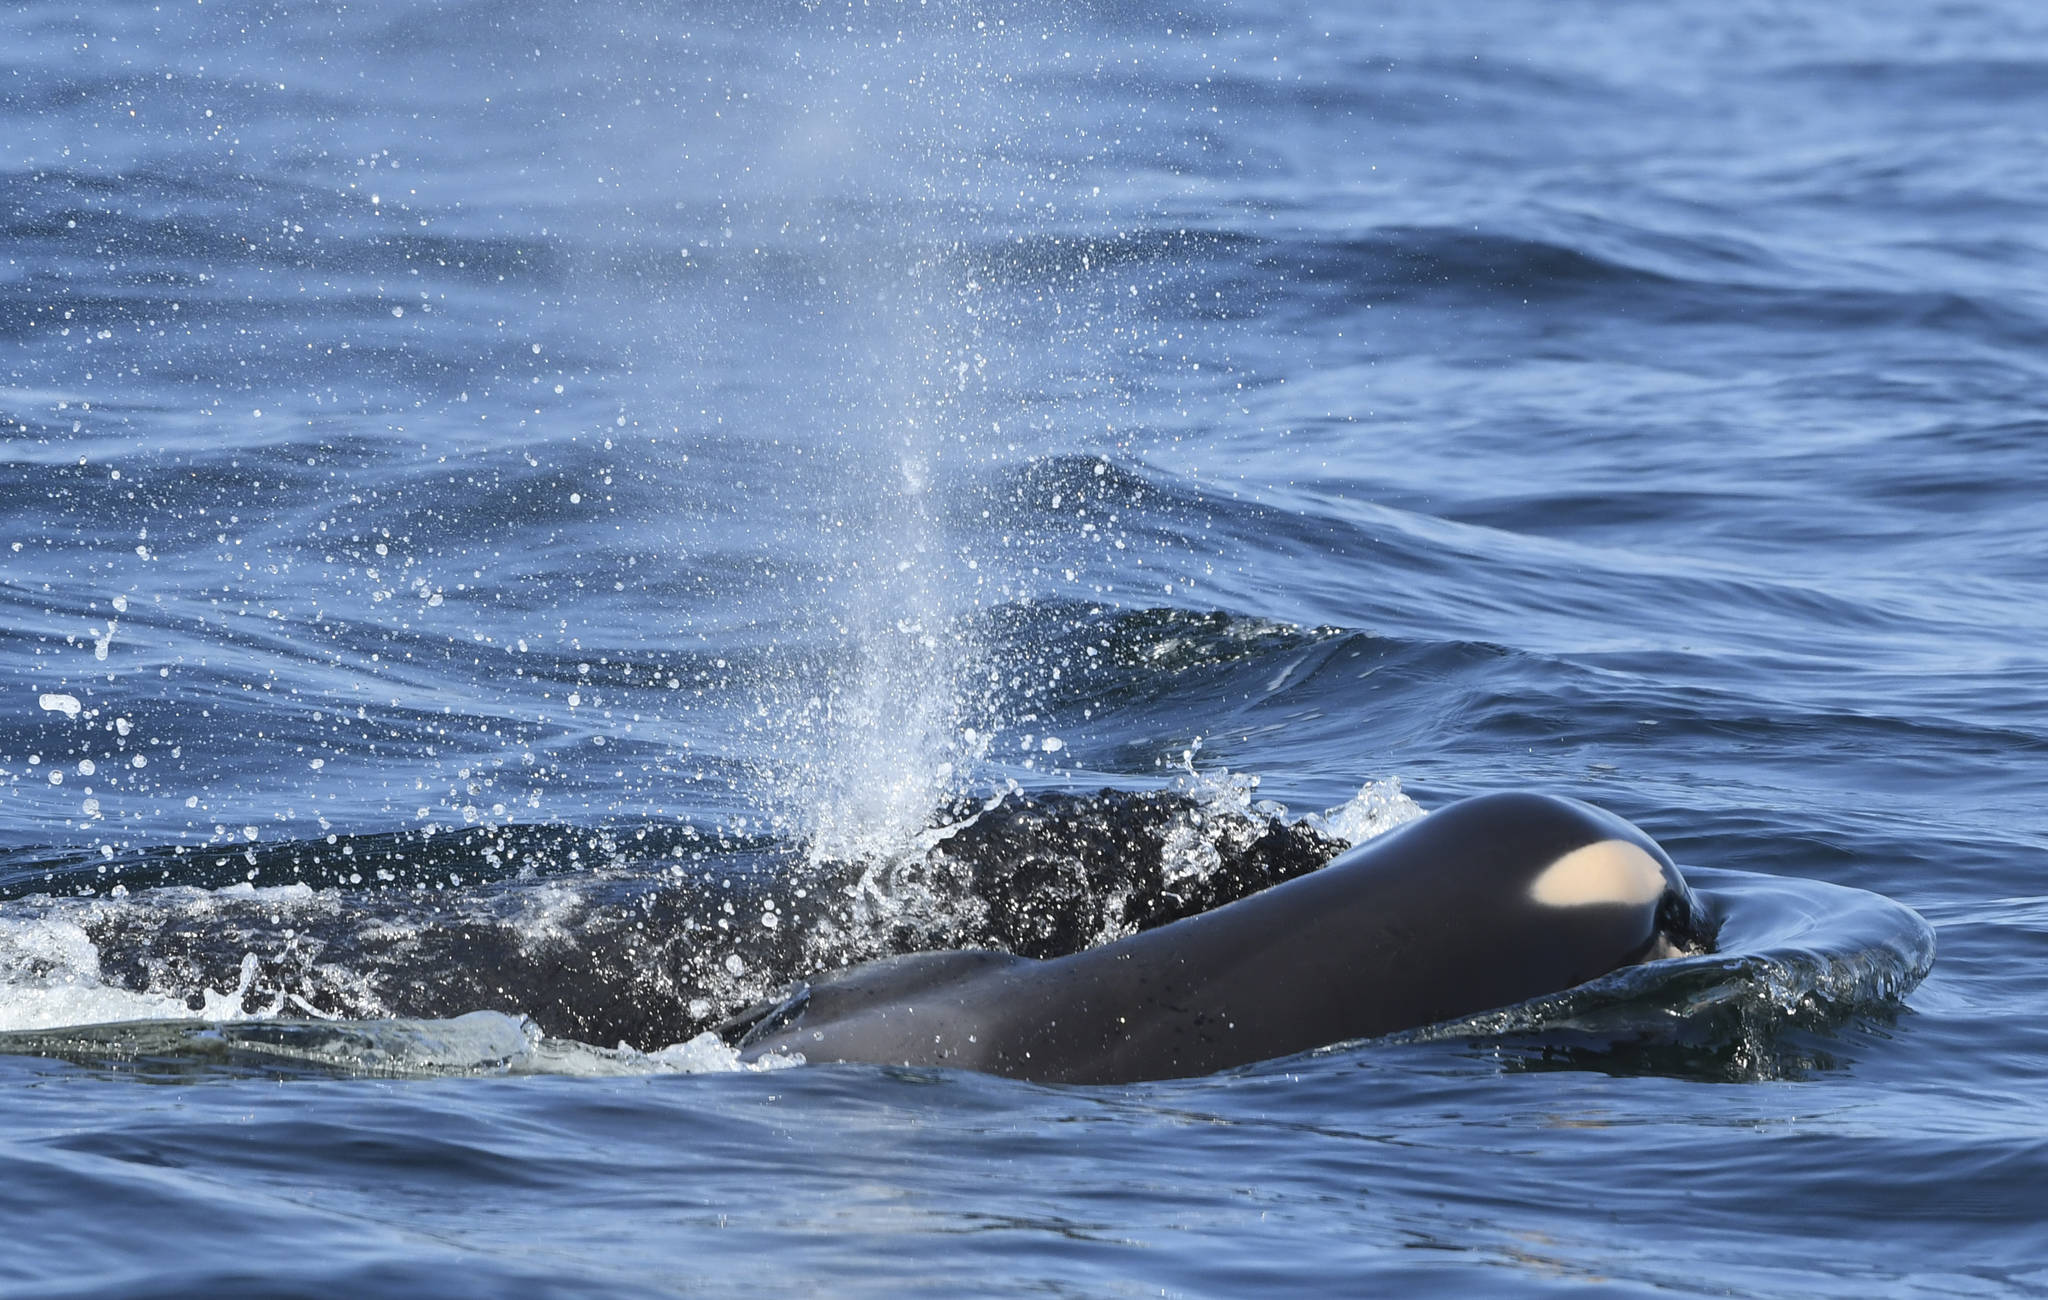 In this photo taken Tuesday, July 24, 2018, provided by the Center for Whale Research, a baby orca whale is being pushed by her mother after being born off the Canada coast near Victoria, British Columbia. The new orca died soon after being born. Ken Balcomb with the Center for Whale Research says the dead calf was seen Tuesday being pushed to the surface by her mother just a half hour after it was spotted alive. Balcomb says the mother was observed propping the newborn on her forehead and trying to keep it near the surface of the water. (David Ellifrit/Center for Whale Research via AP)